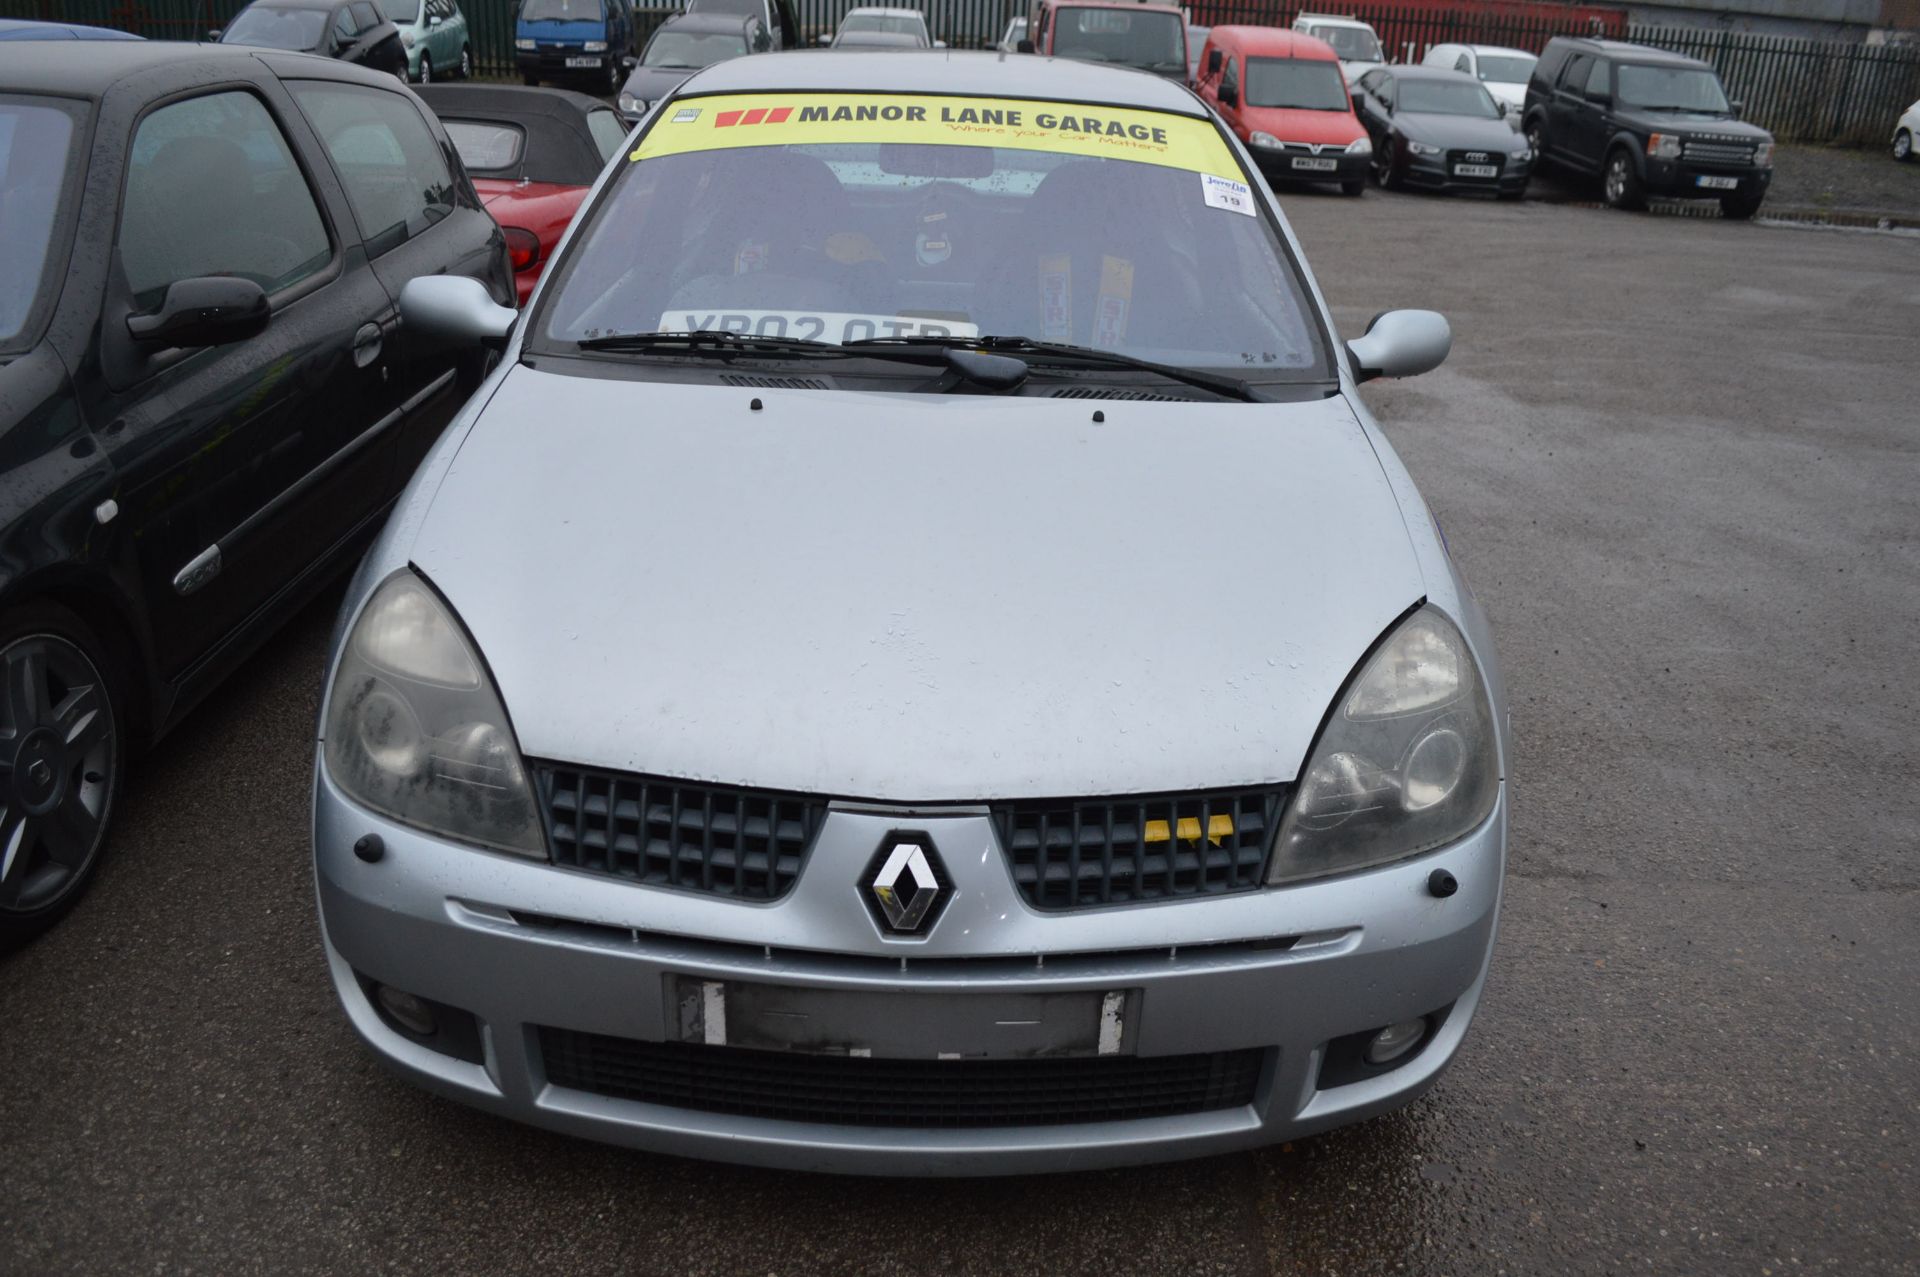 2002/02 REG RENAULT CLIO 2.0 SPORT TRACK/RACE CAR STRIPPED FOR TRACK DAYS - Image 2 of 14